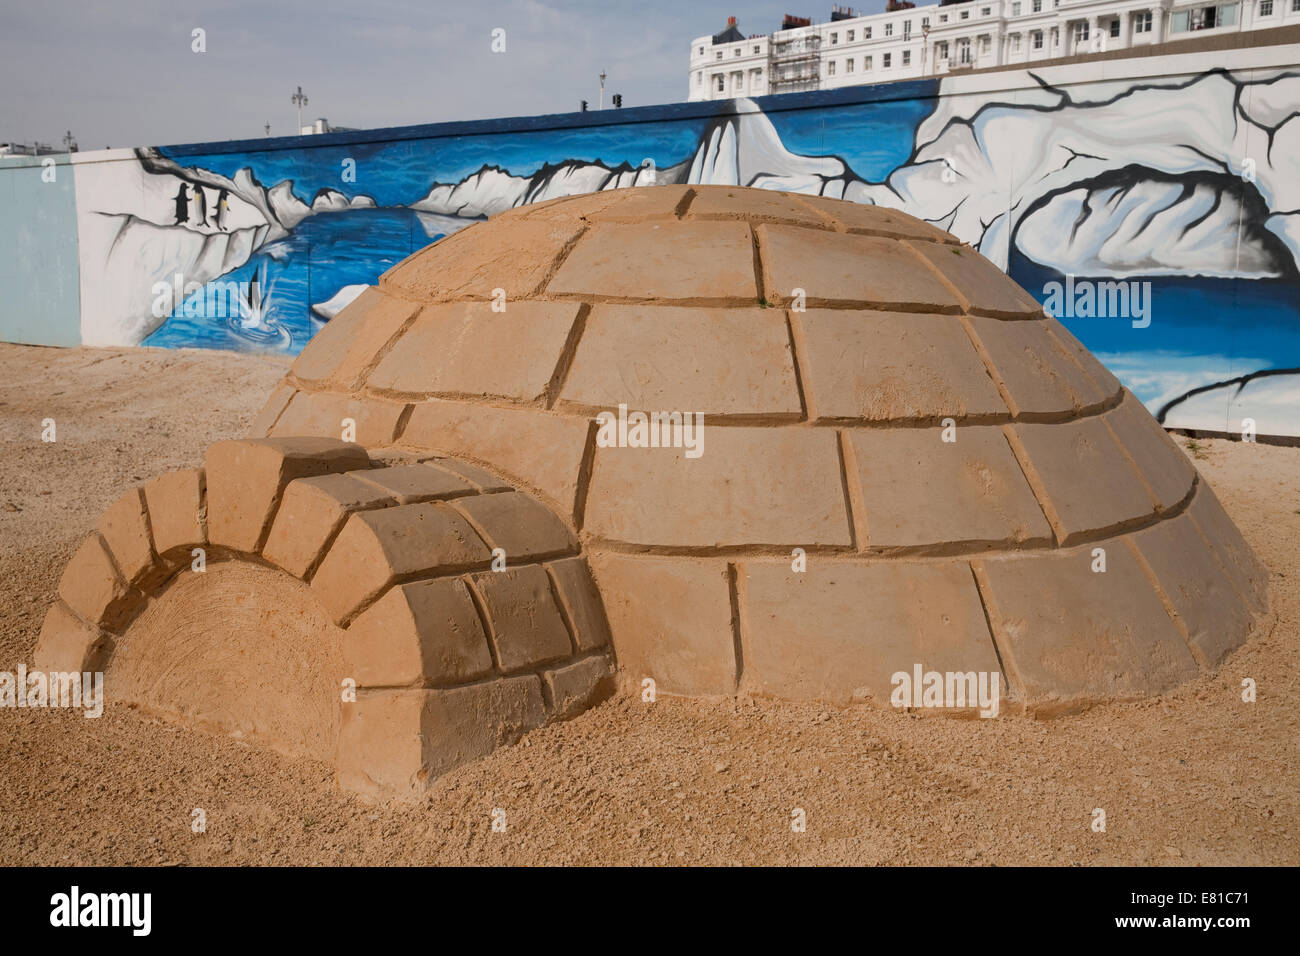 An iglu from the South Pole on display at the Sand Sculpture festival in Brighton Stock Photo